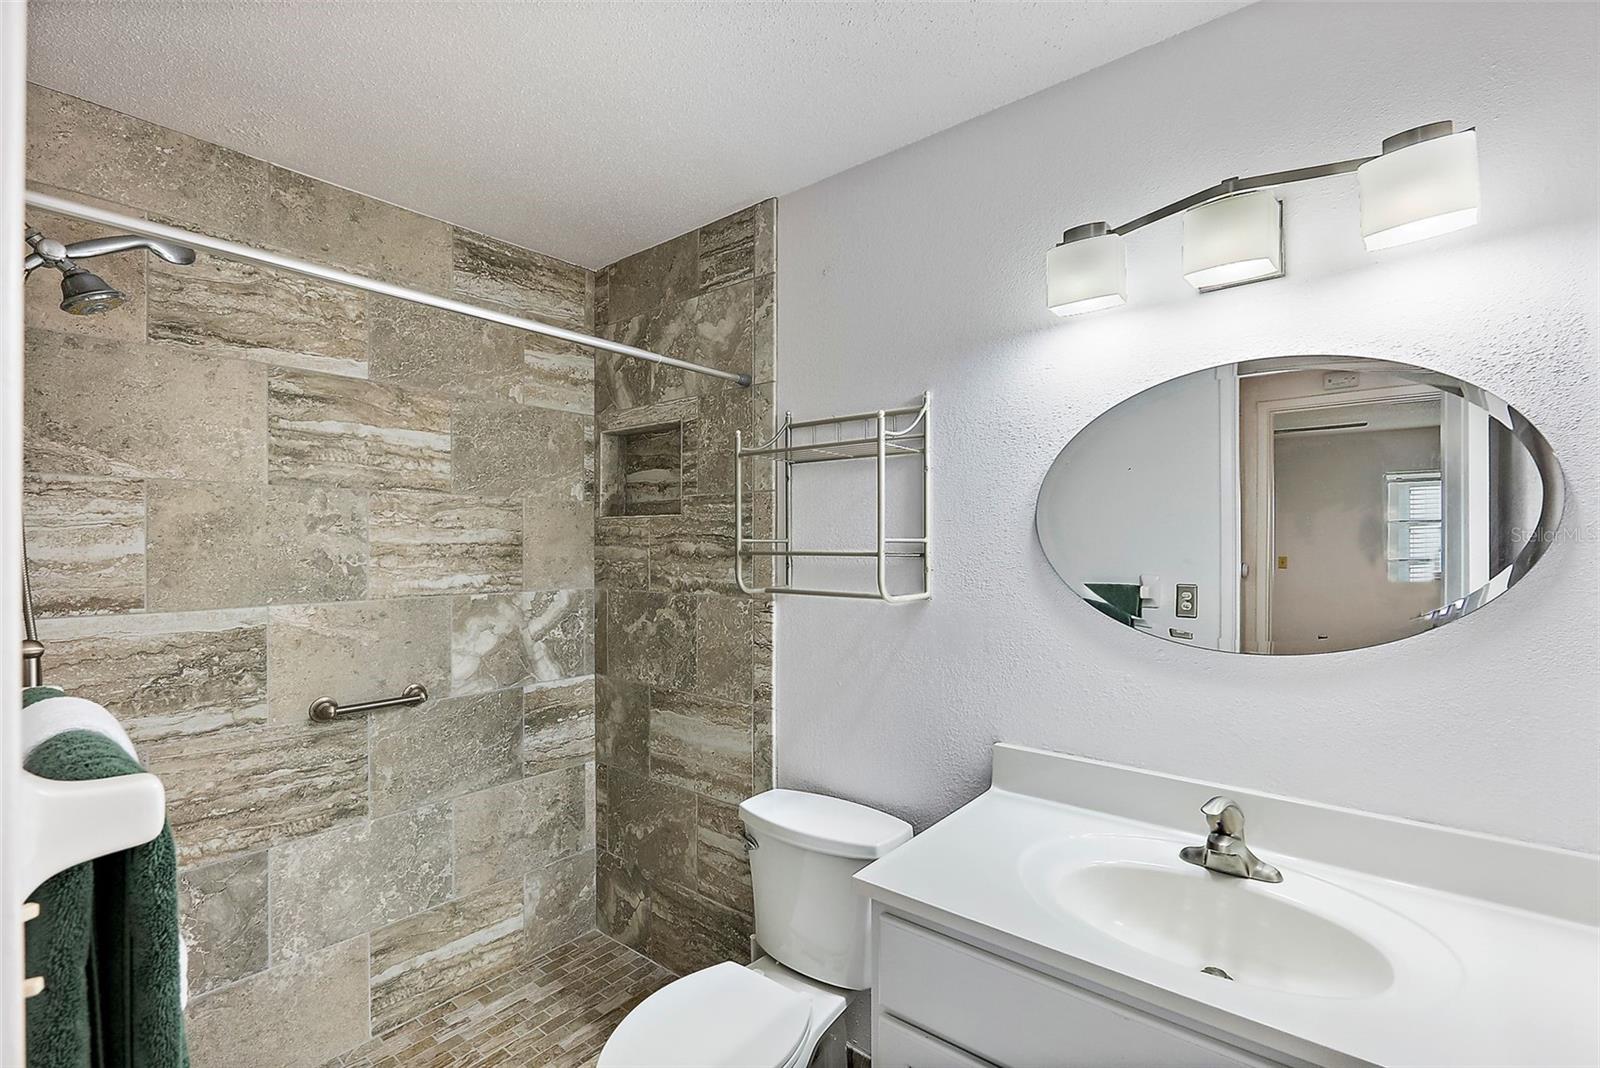 Renovated bath with walk-in shower.